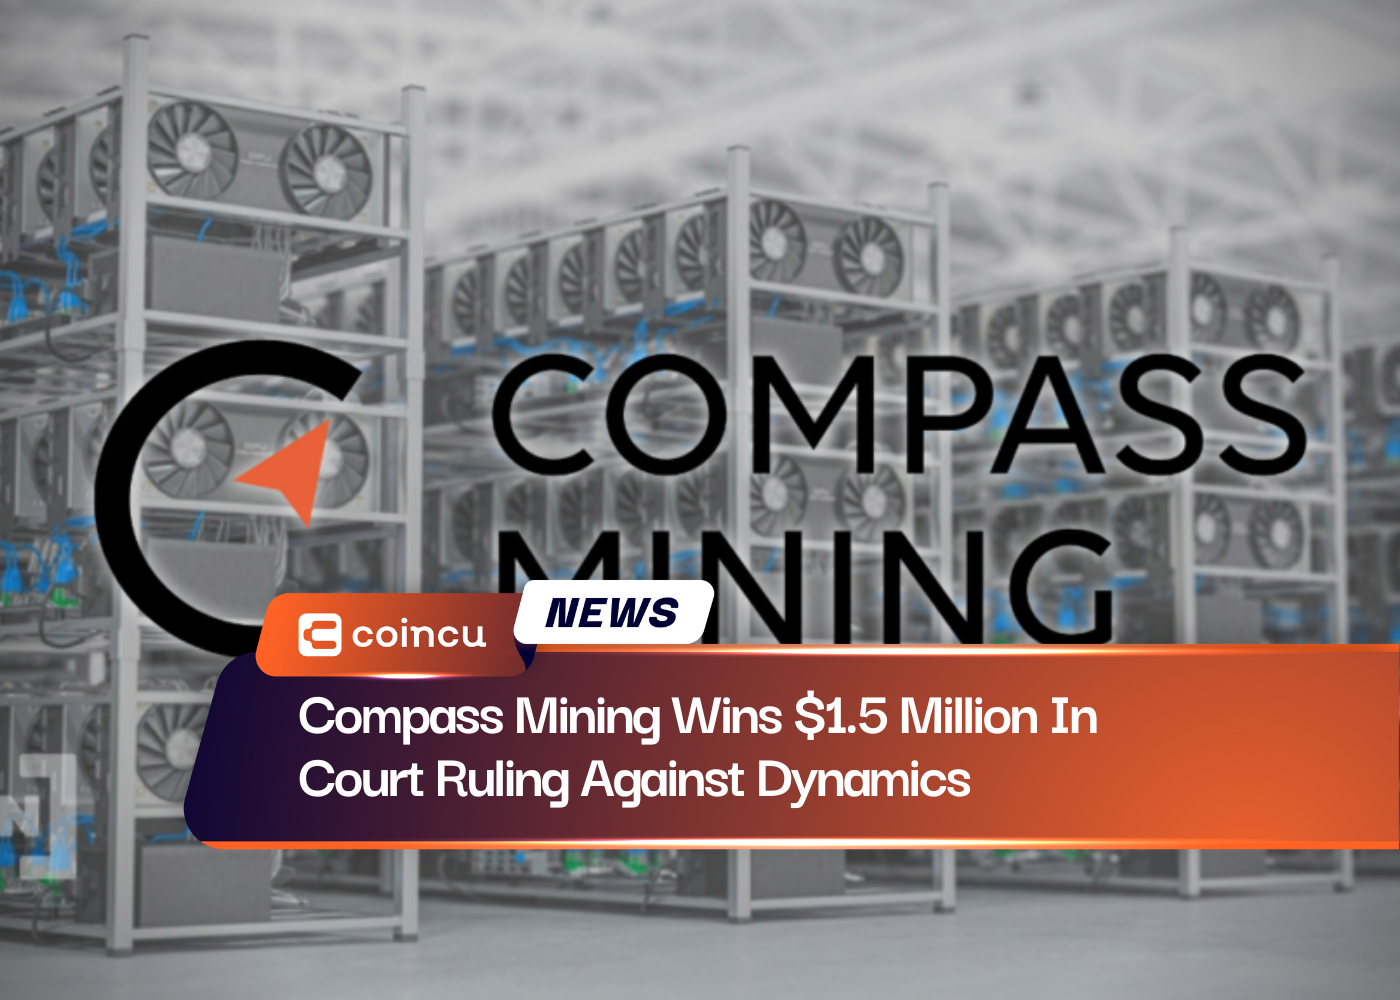 Compass Mining Wins $1.5 Million In Court Ruling Against Dynamics